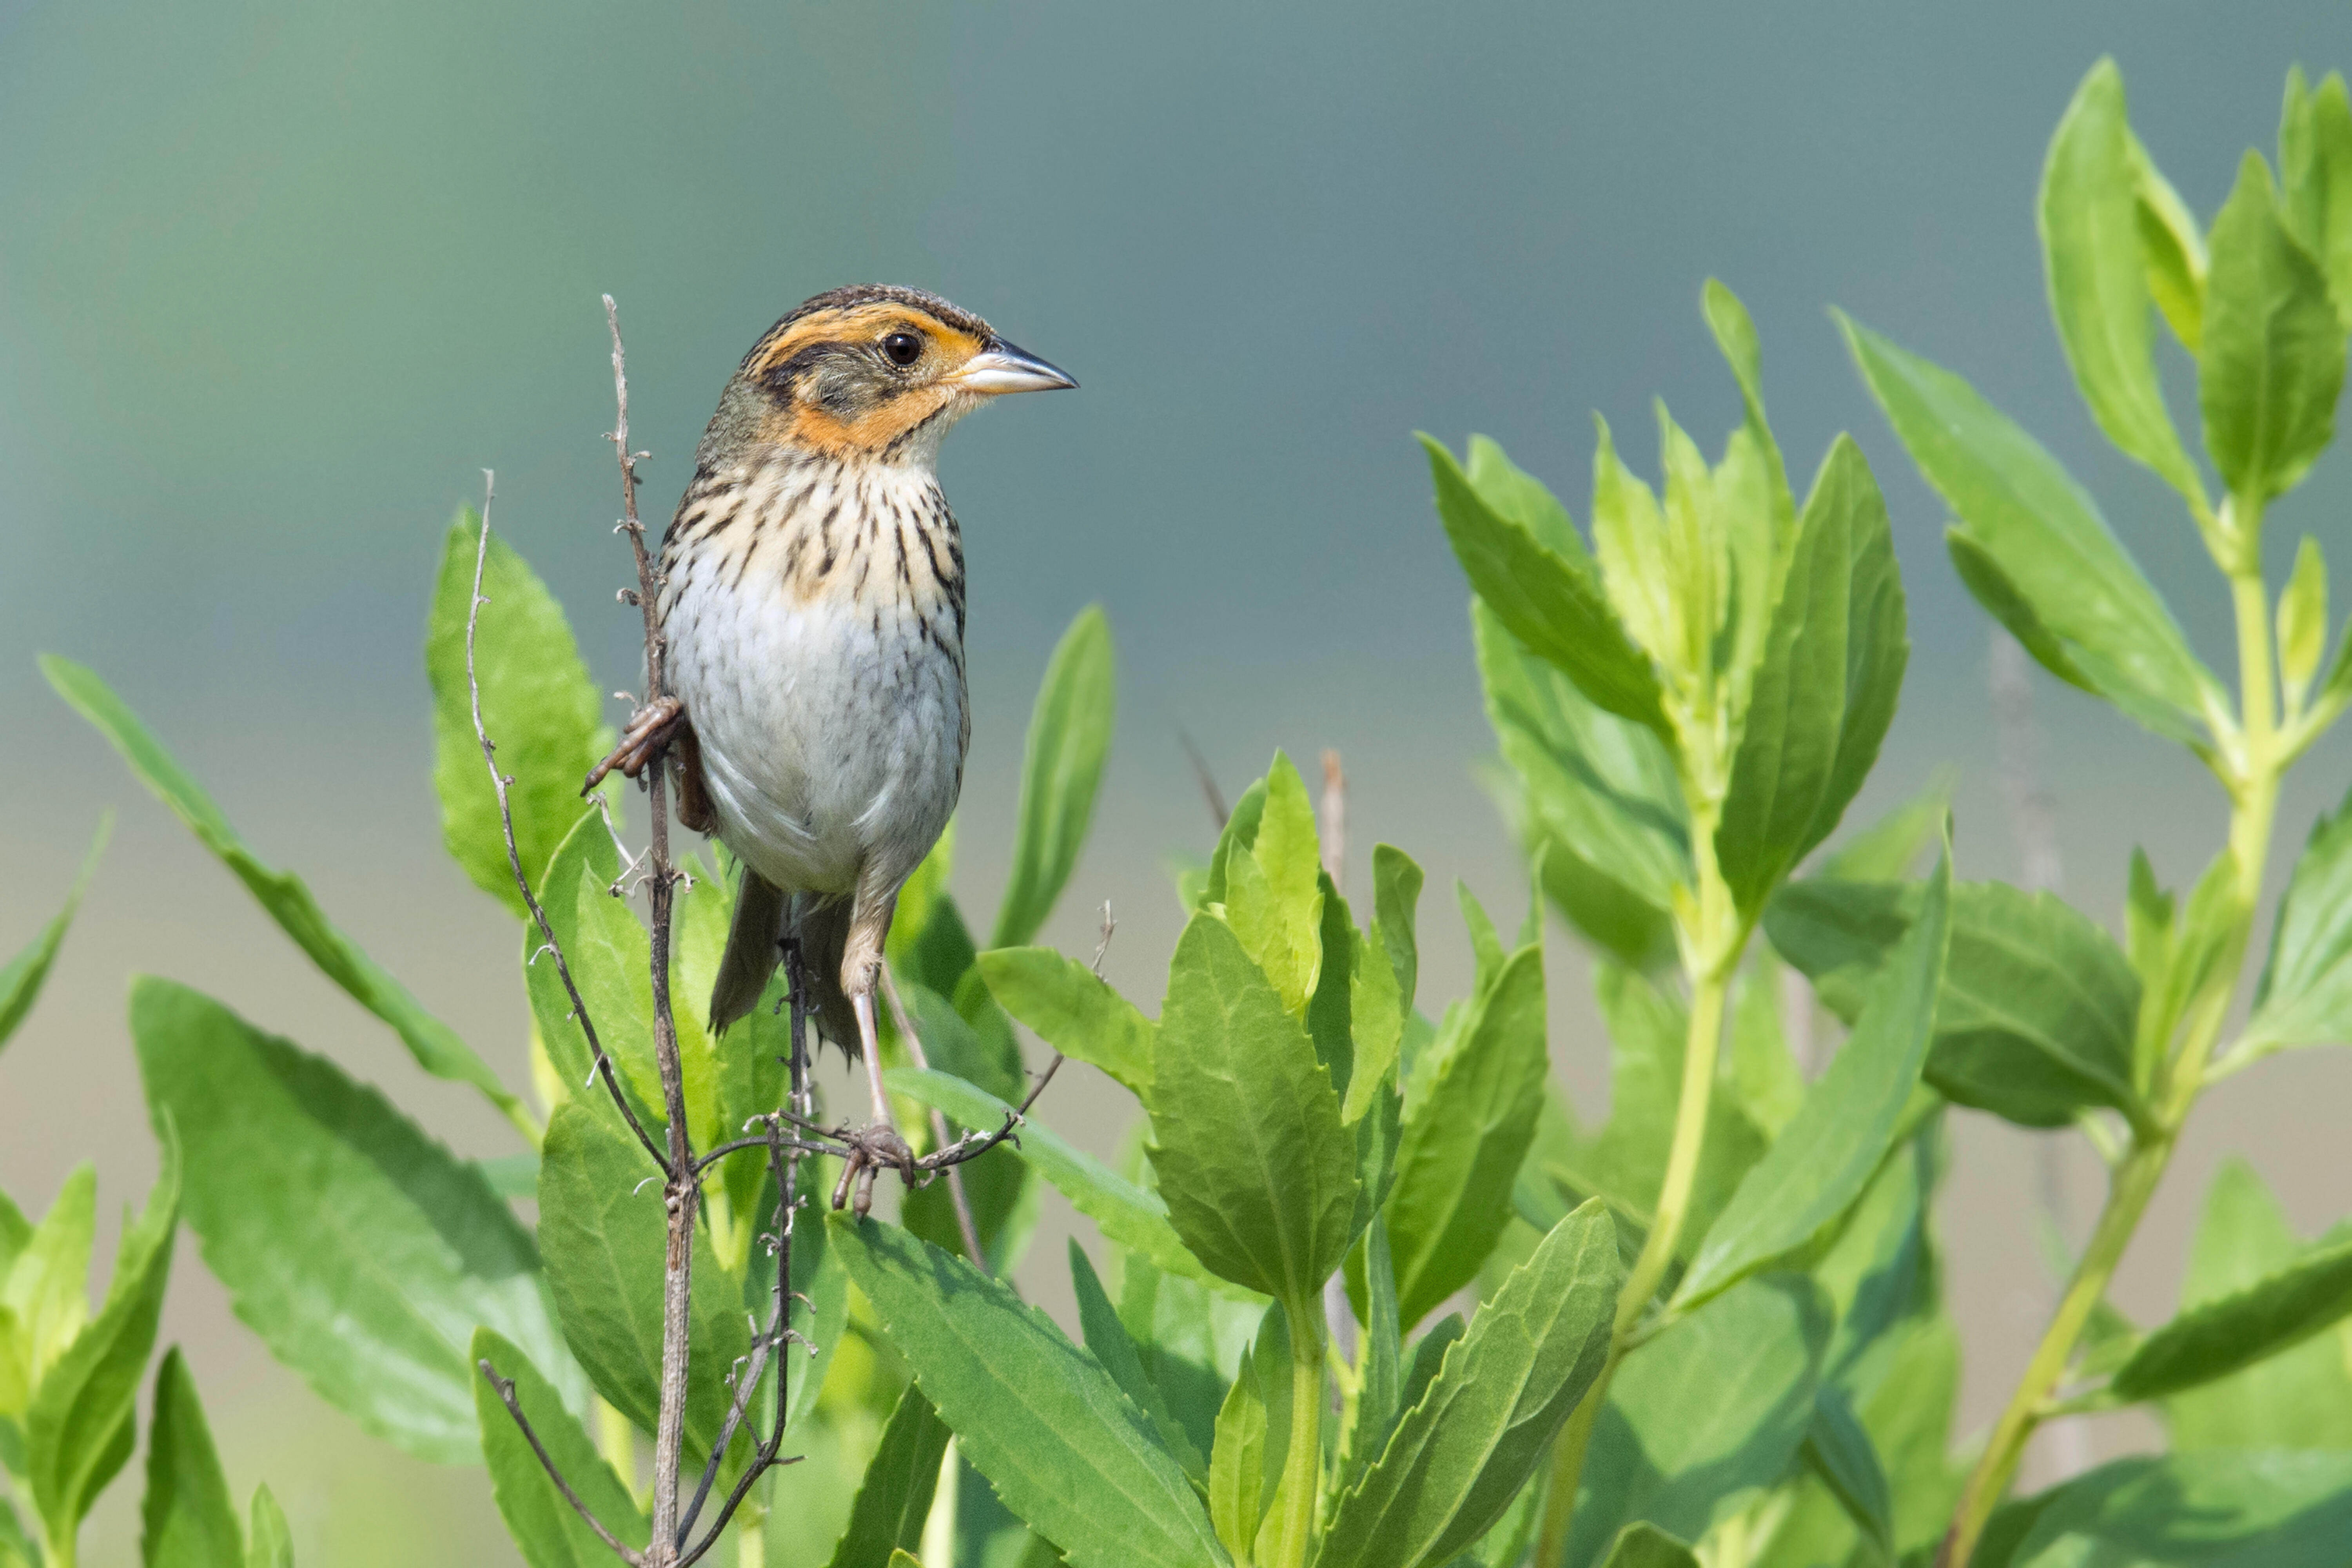 A Saltmarsh Sparrow perches in a green-leafed shrub, looking to the left.